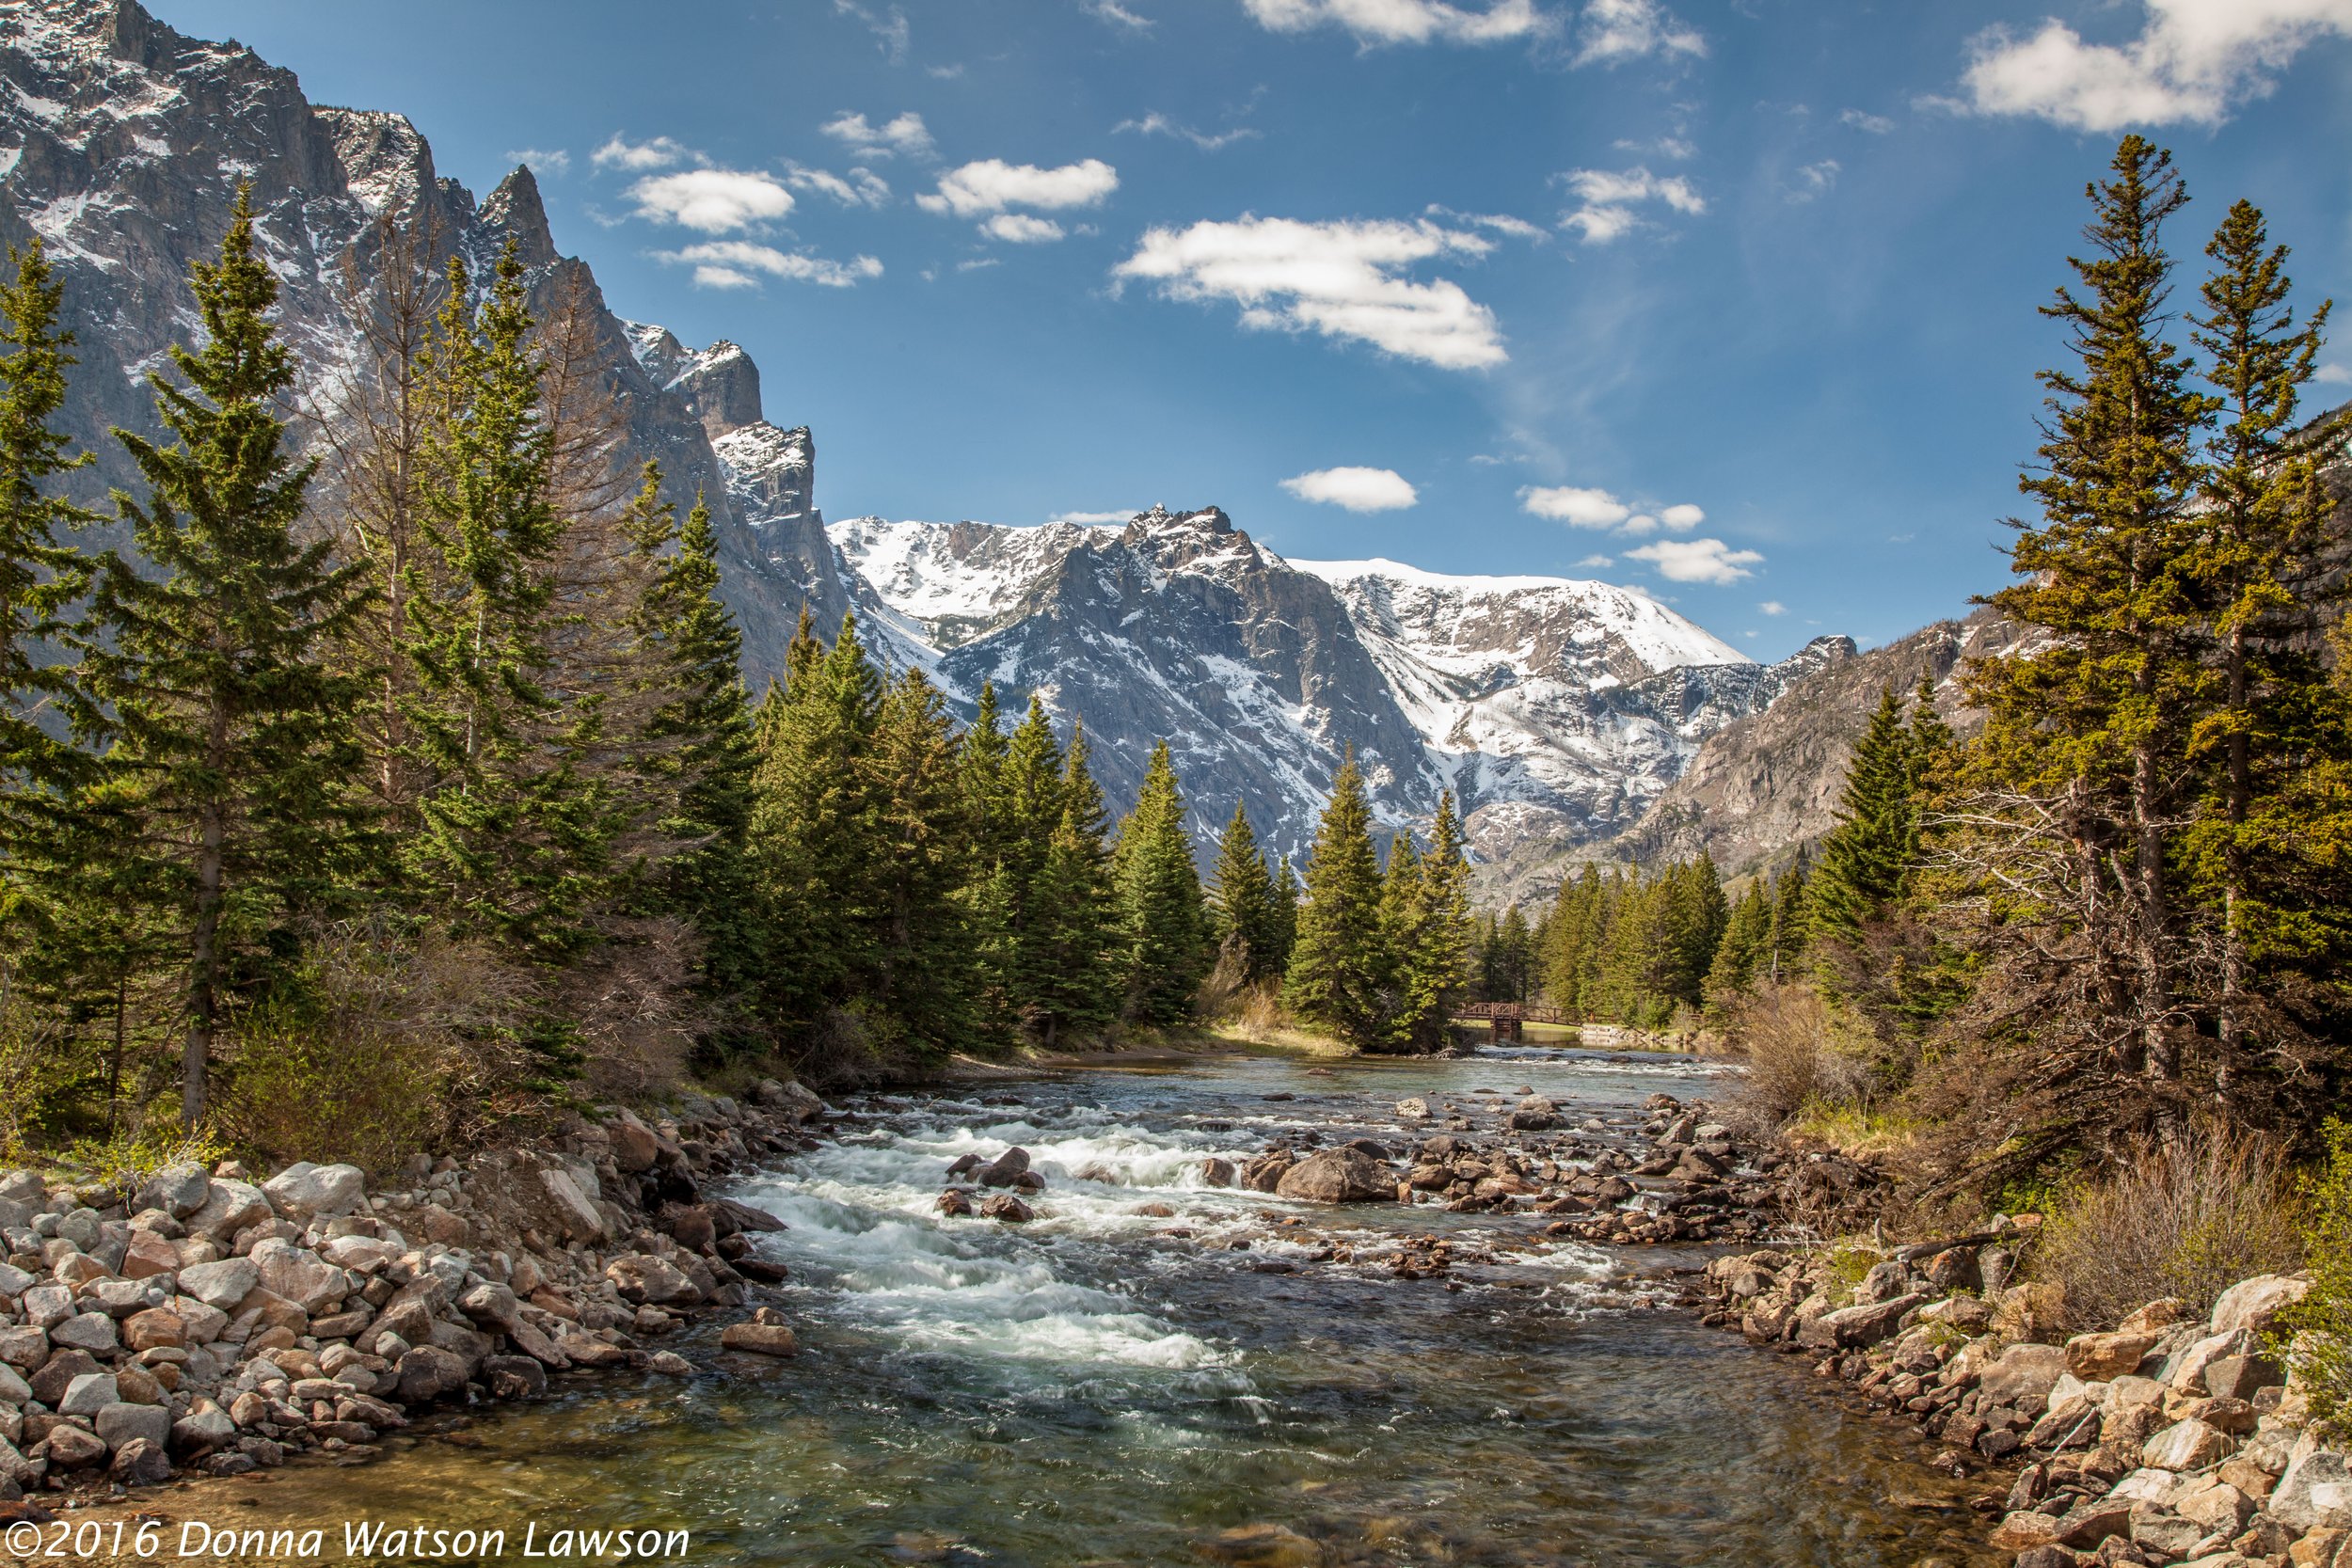 VICTORY! East Rosebud Creek protected by law — Greater Yellowstone Coalition